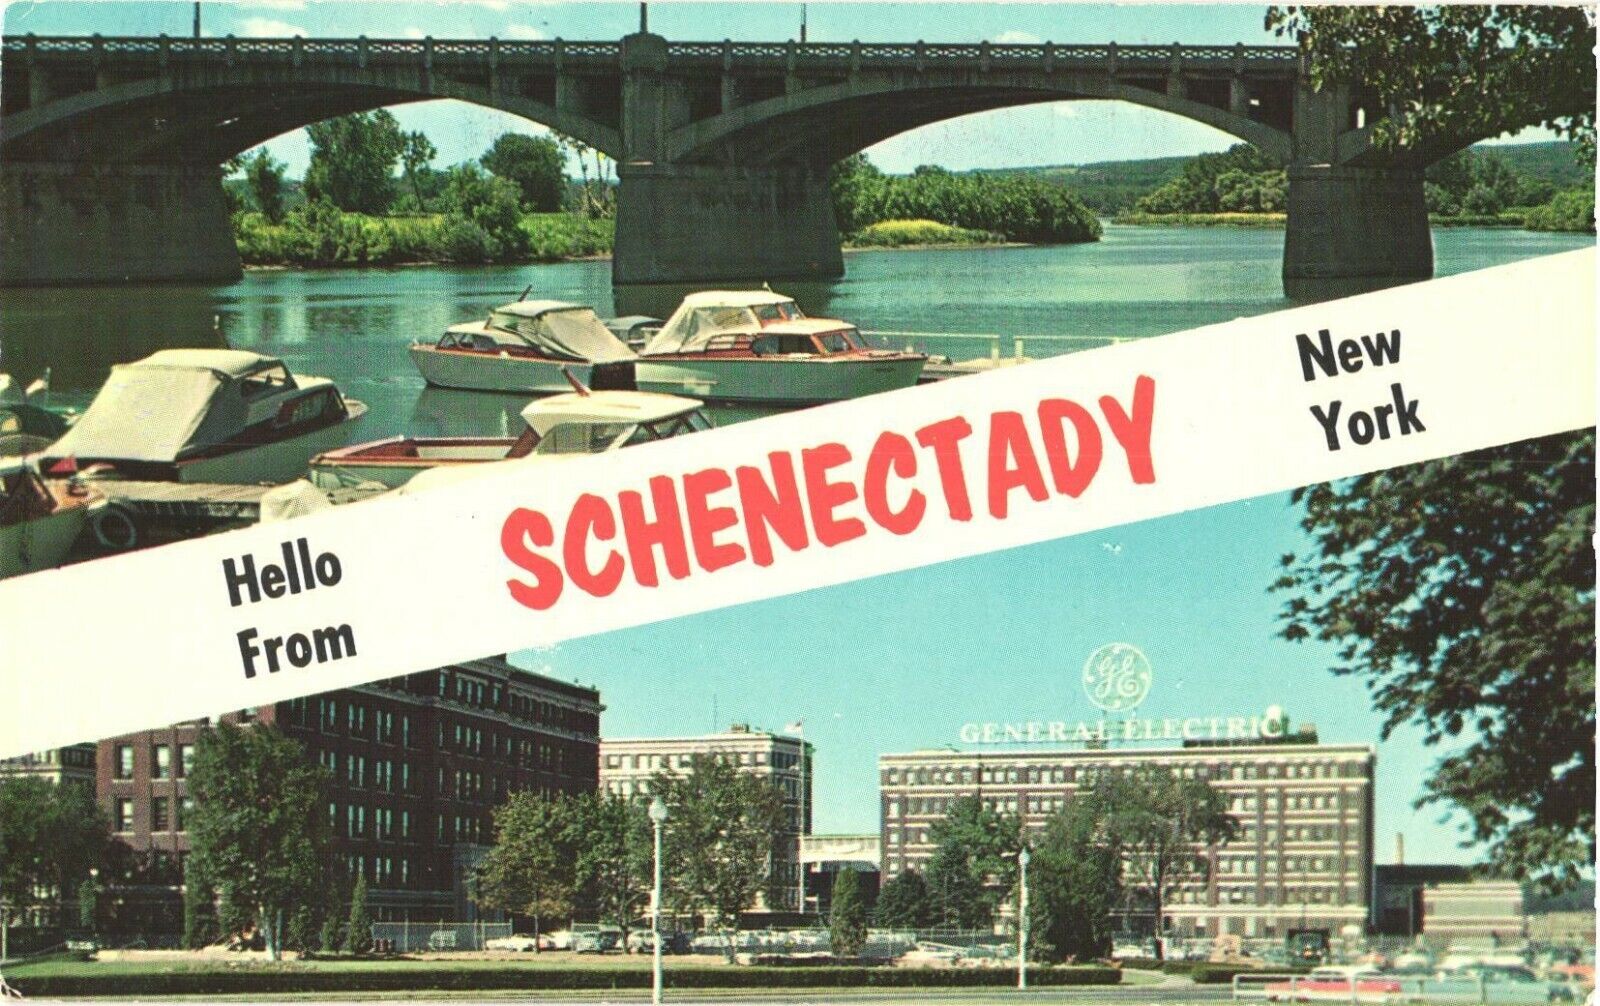 View of Buildings, Cars And Boats, Hello From Schenectady, New York Postcard